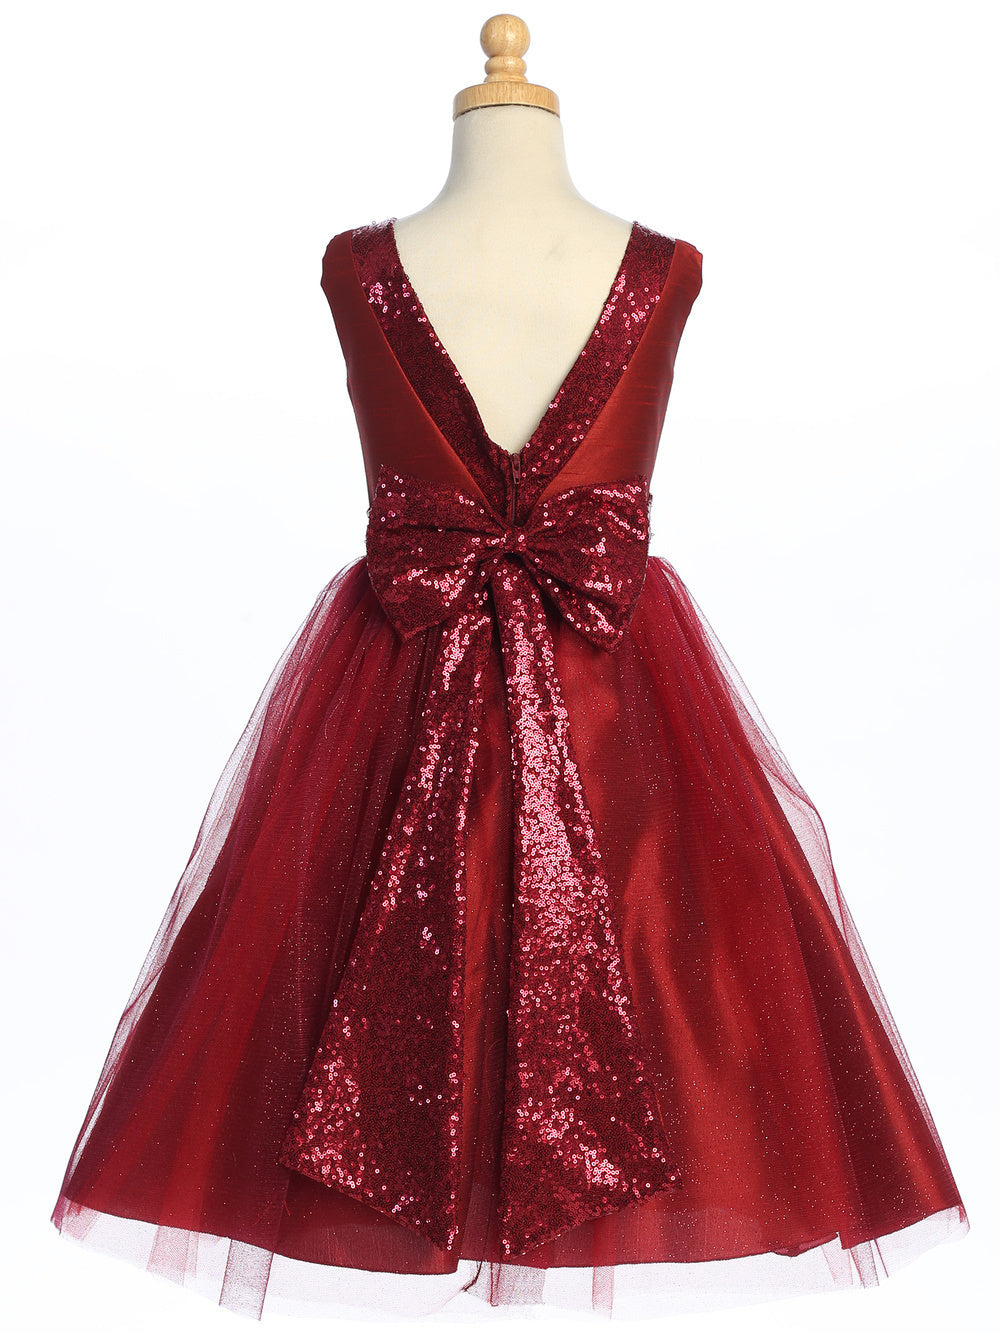 Flower girl enchants in a burgundy dress of sequined shantung and sparkle tulle.